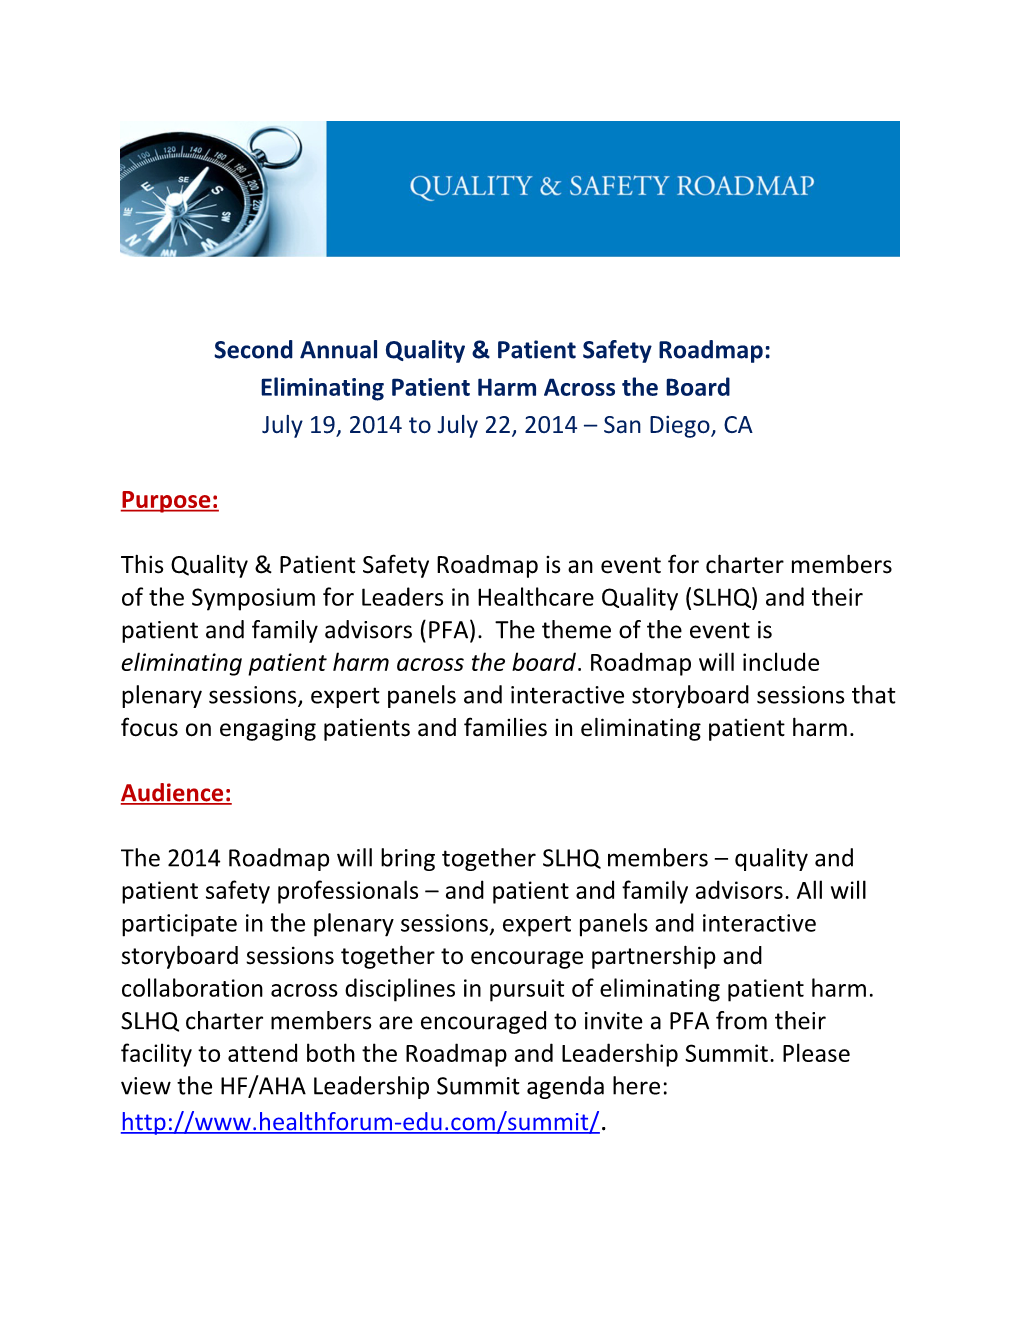 Second Annual Quality & Patient Safety Roadmap